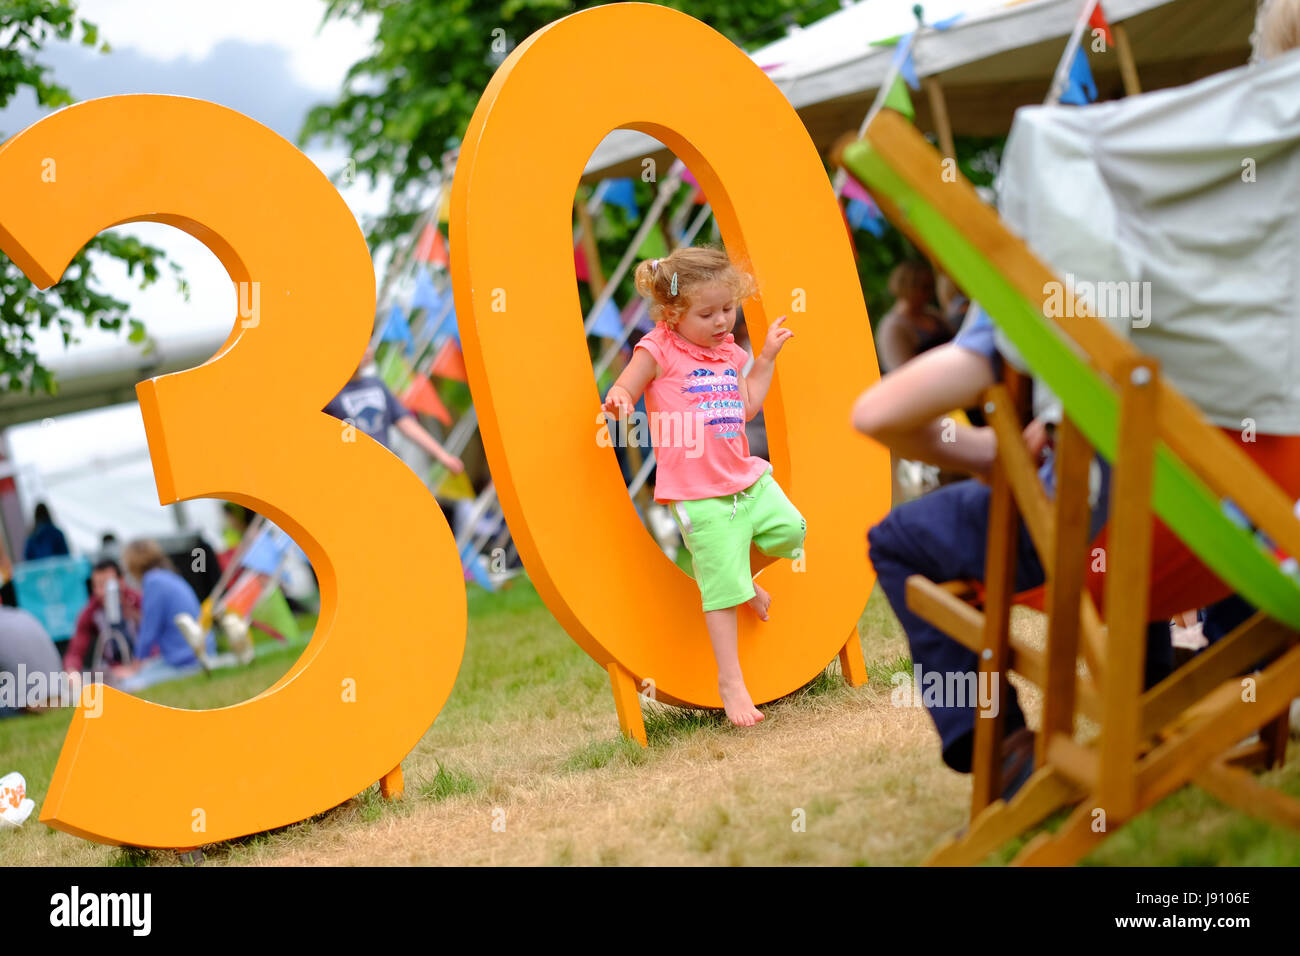 Hay Festival 2017 - Hay on Wye, Wales, UK - May 2017 - Half Term Hay - Children play on the giant iconic HAY 30 letters on the Festival lawns - the Hay Festival celebrates its 30th anniversary in 2017 - . Credit: Steven May/Alamy Live News Stock Photo